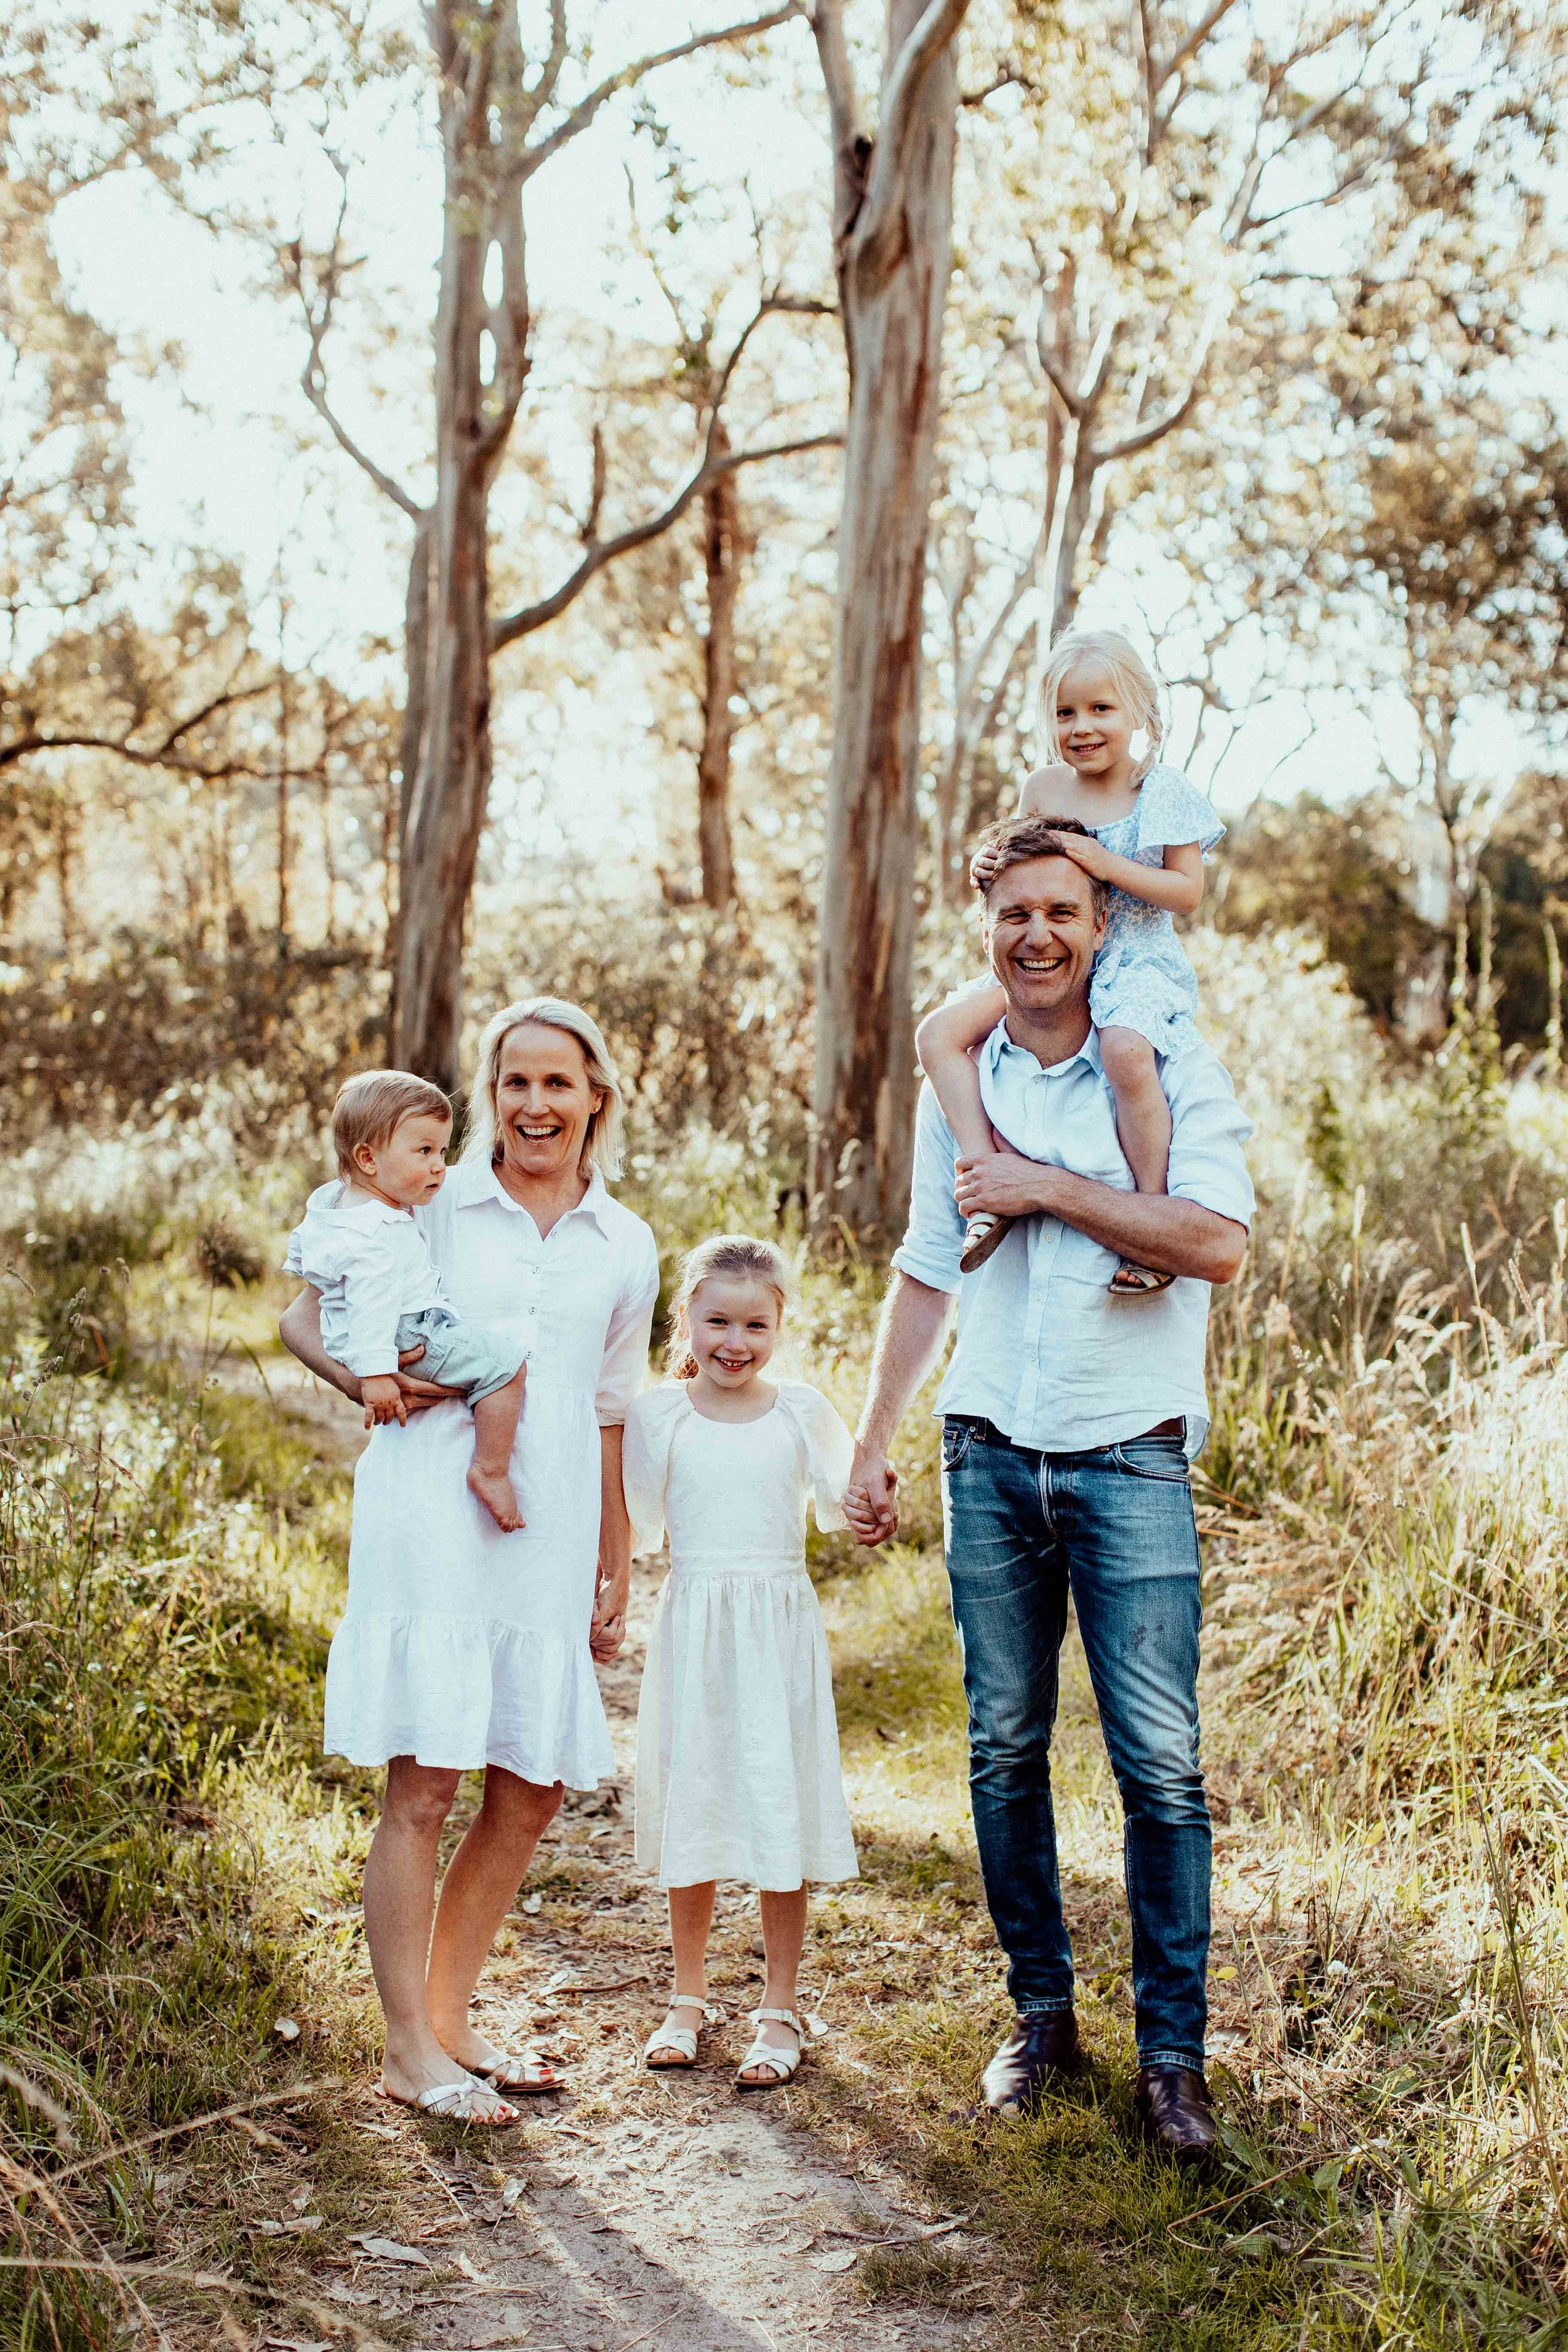 poole-family-bowral-southern-highlands-inhome-family-lifestyle-wollondilly-camden-macarthur-sydney-photography-www.emilyobrienphotography.net-35.jpg